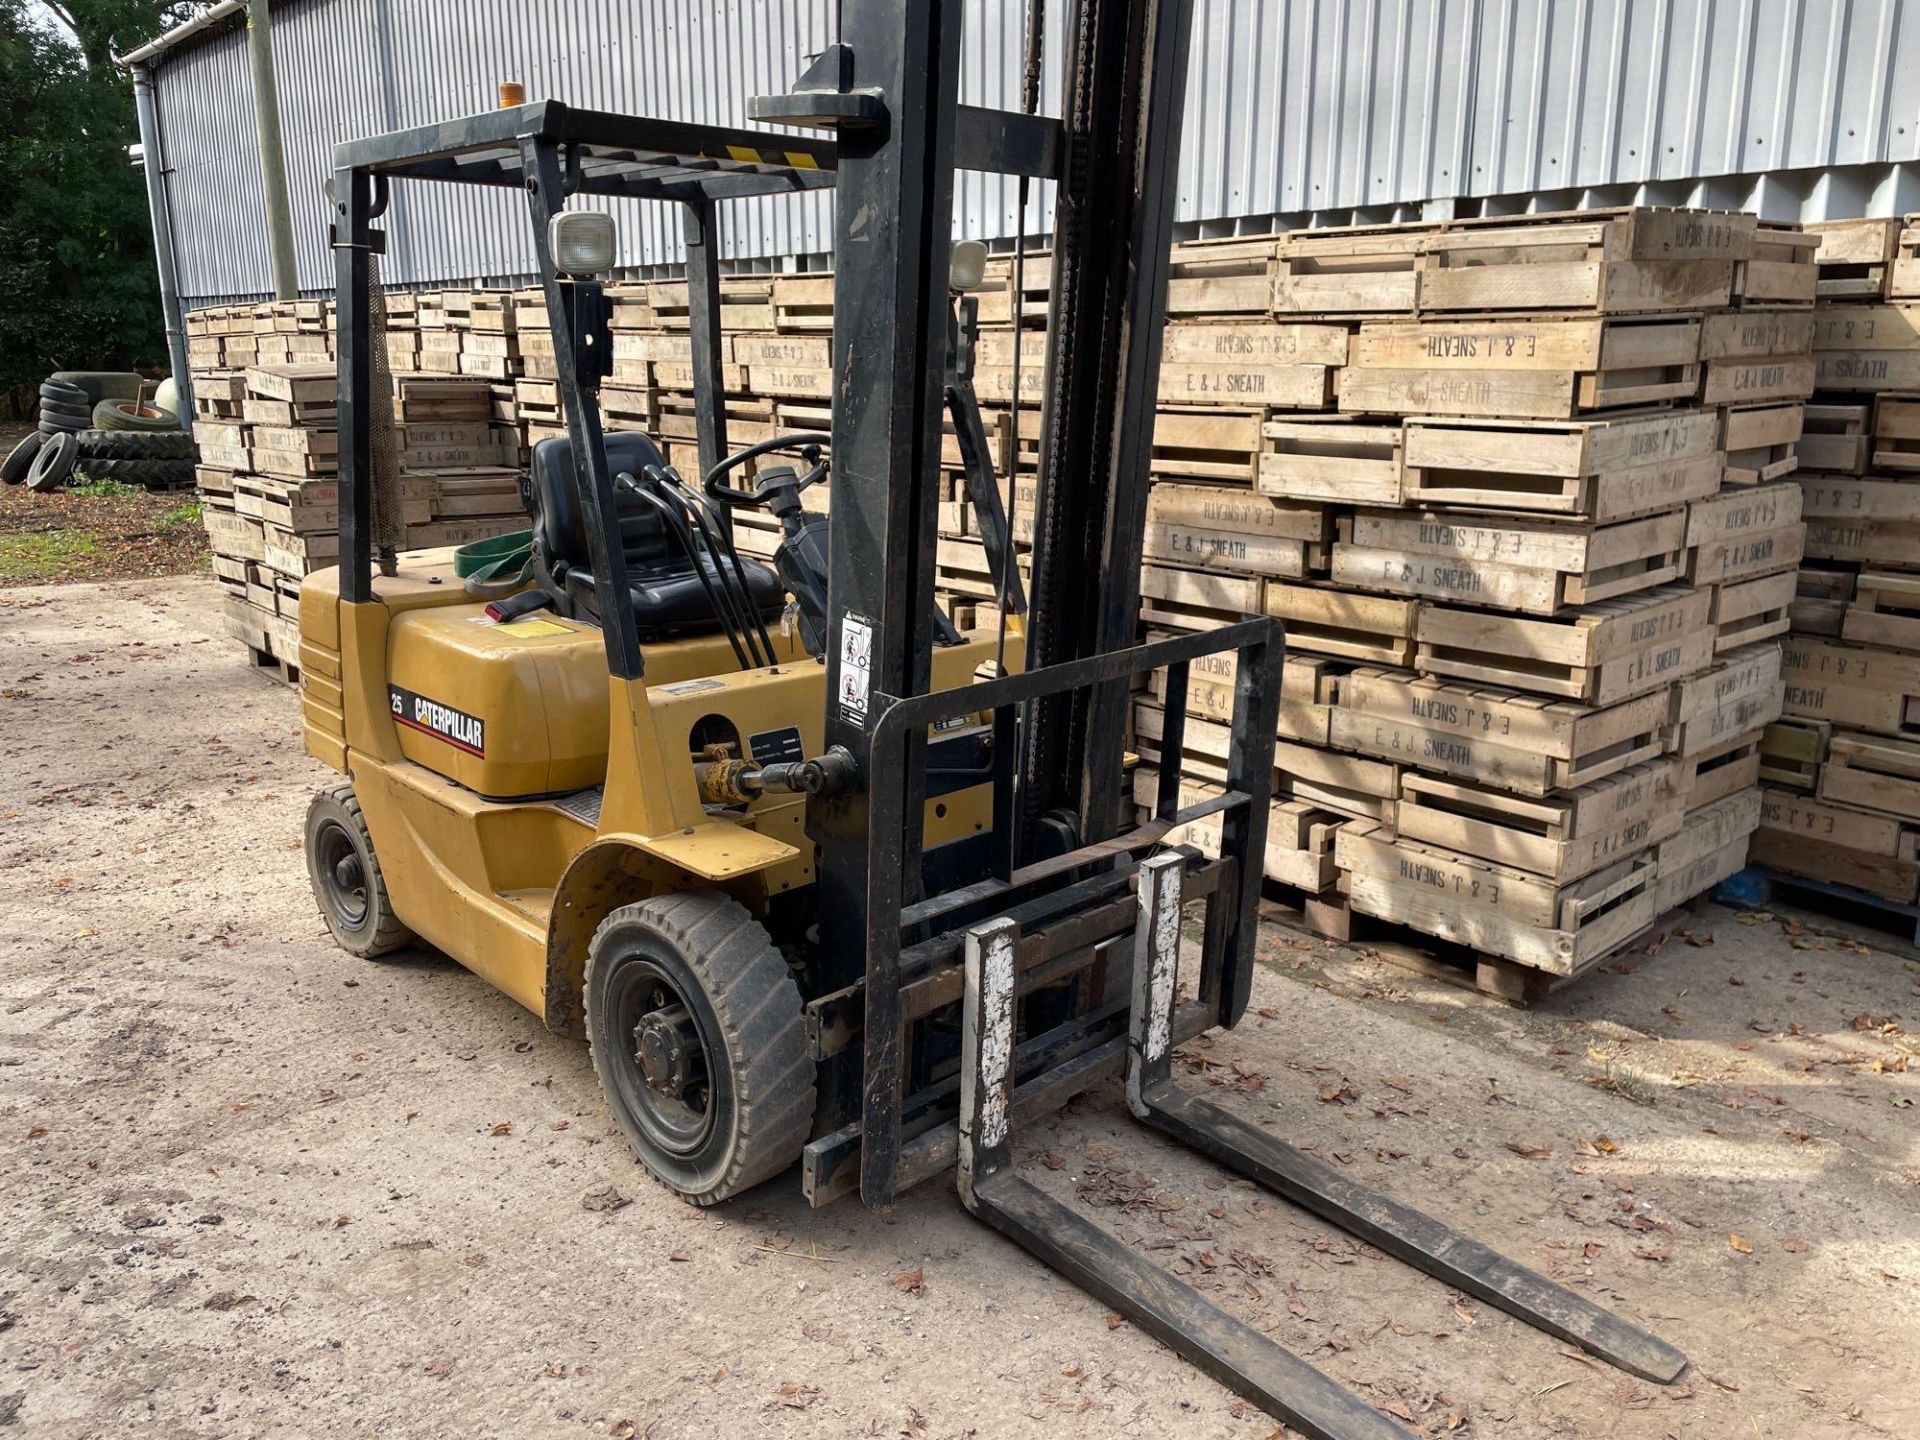 1996 Caterpillar DP25 2.5t industrial forklift. Hours: 6517. Serial No: 6BN00199. Manual in office.